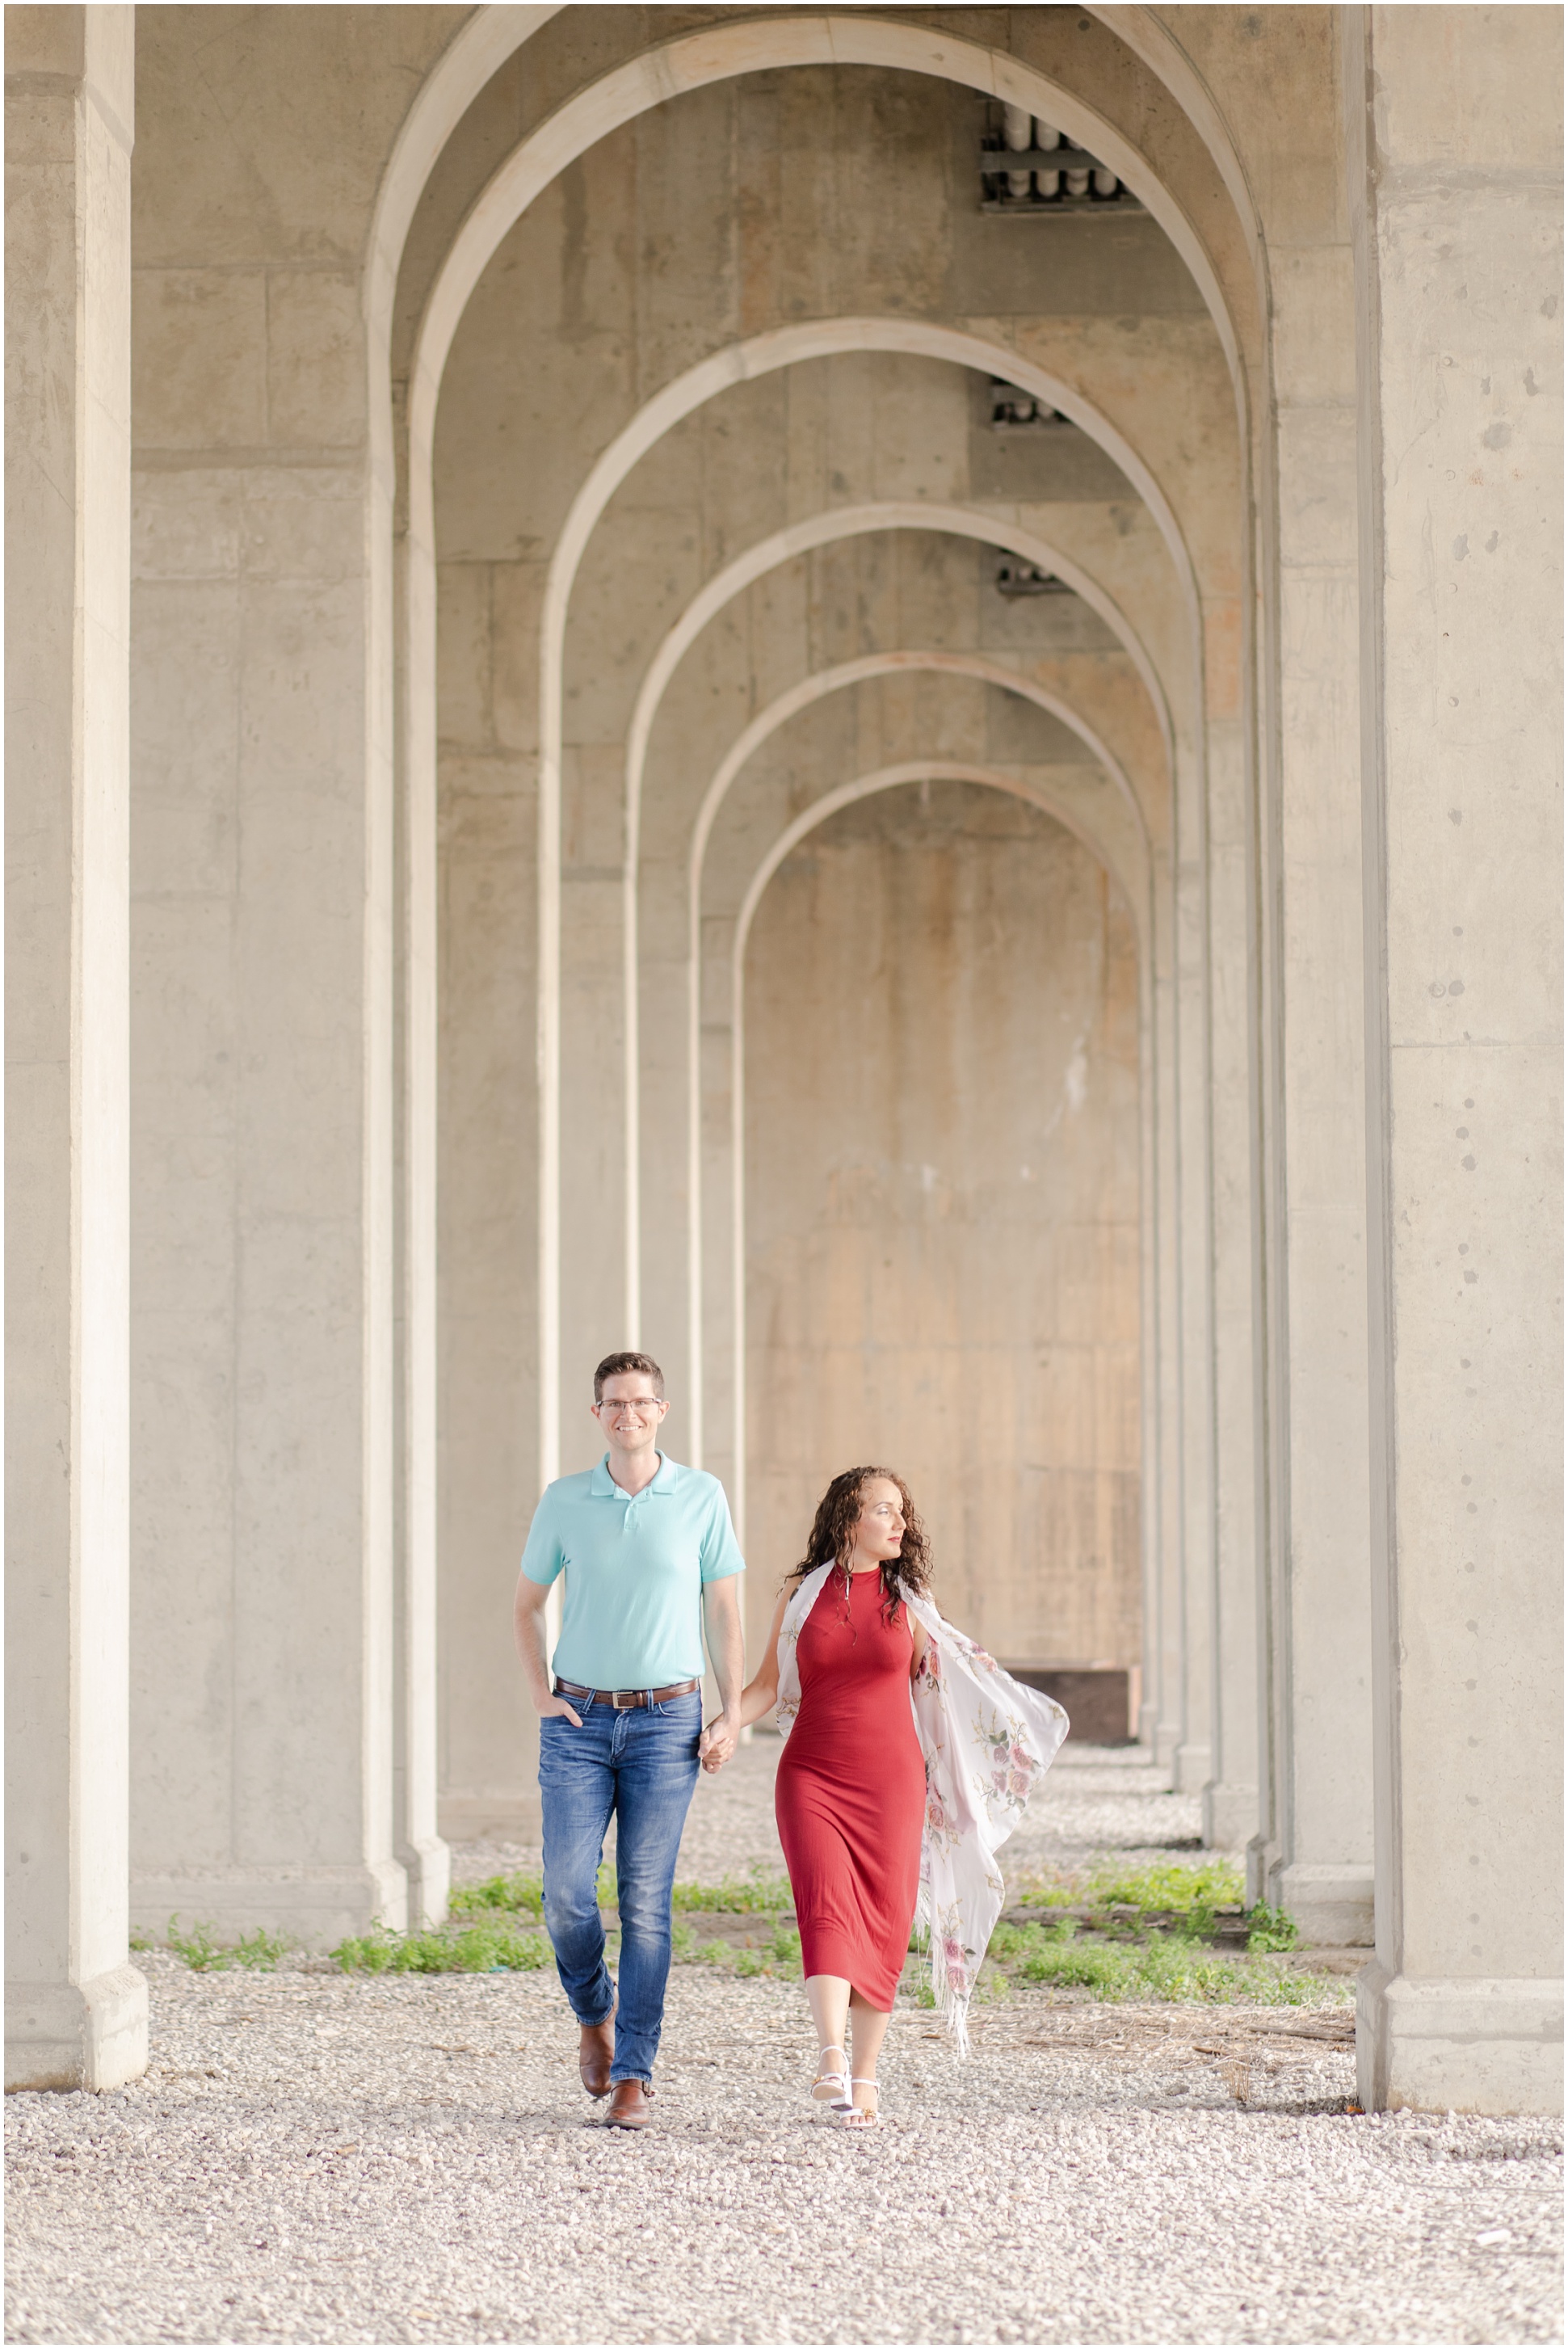 Man wearing teal shirt and woman wearing a red dress and a shaw walking hand-in-hand under The Hanover Street Bridge